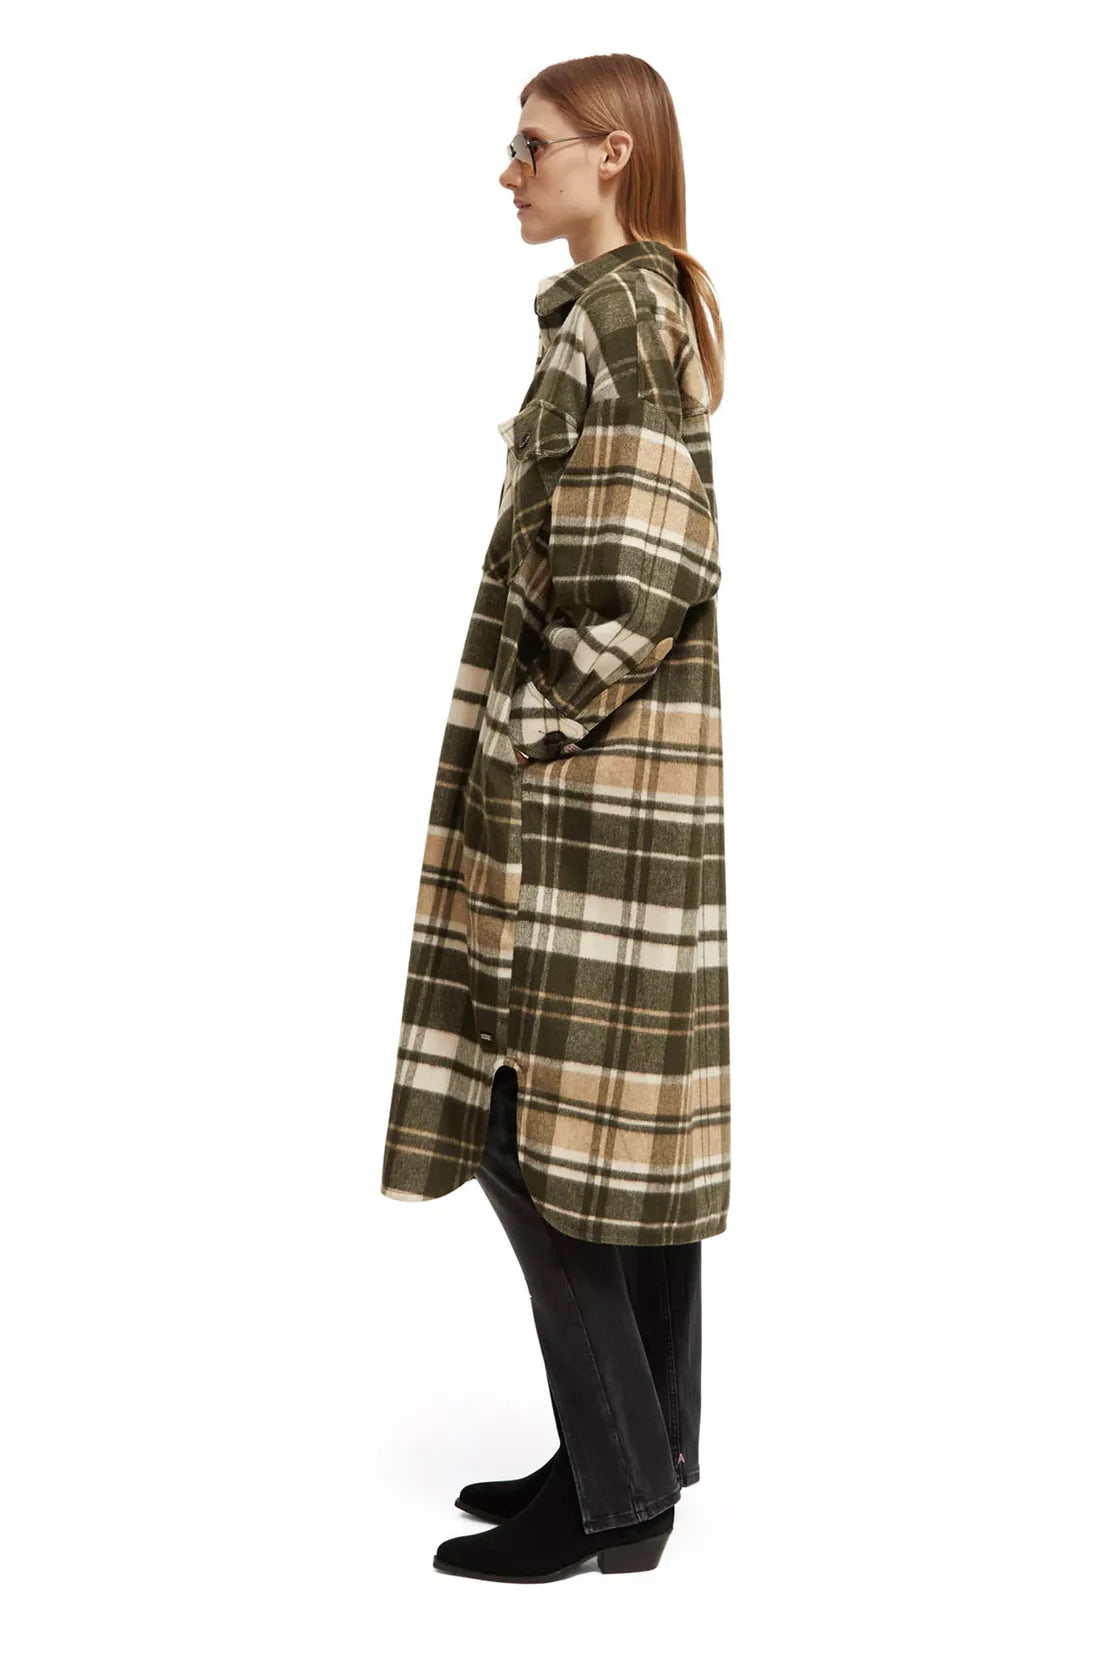 Wool Blend Checked Long Shirt Jacket in Field Green